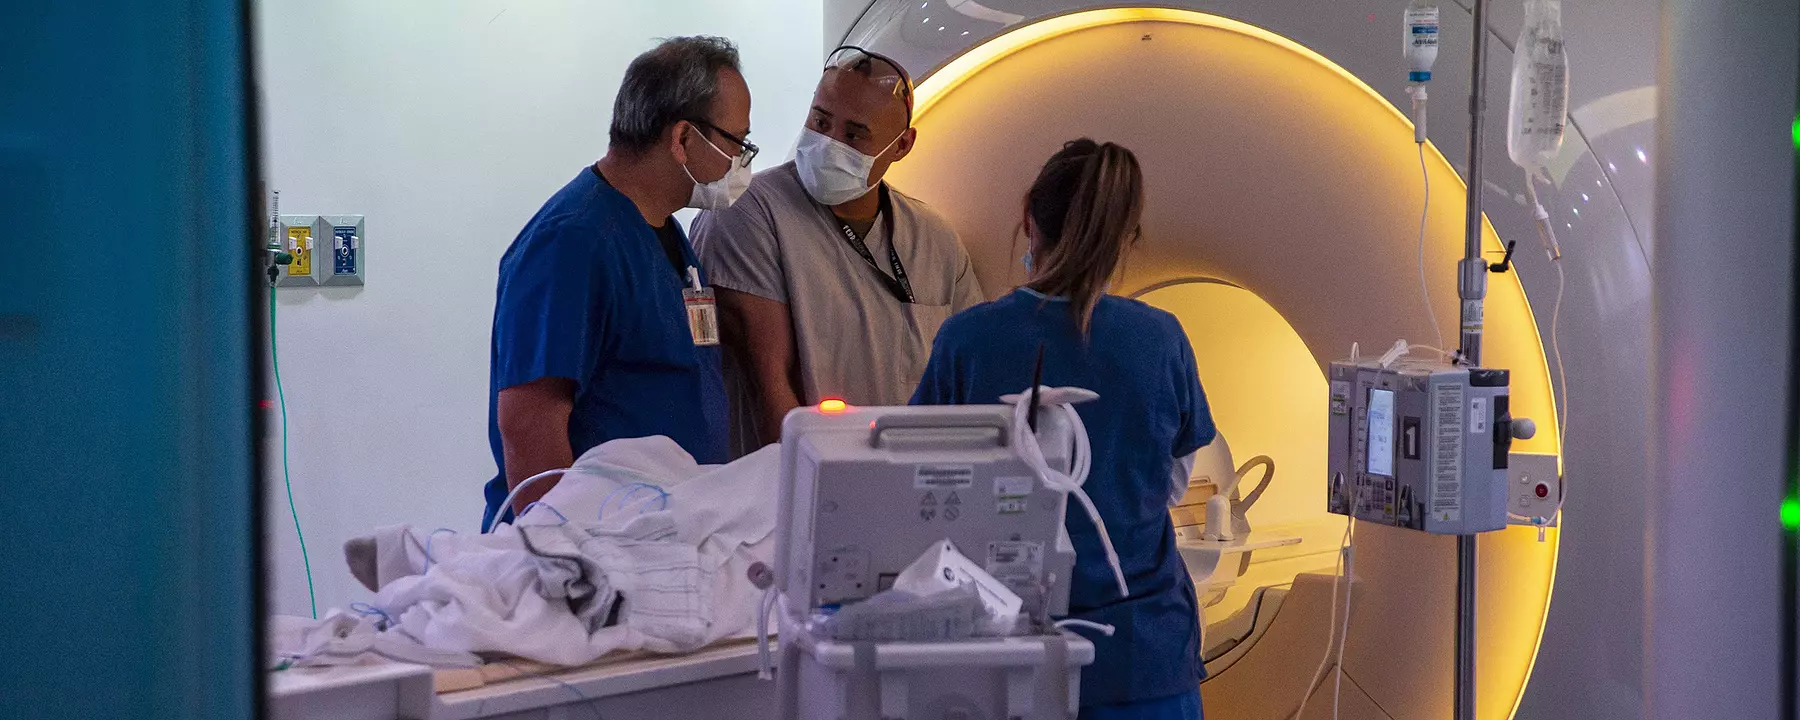 Medical personnel help a patient prepare for an MRI at a military hospital.